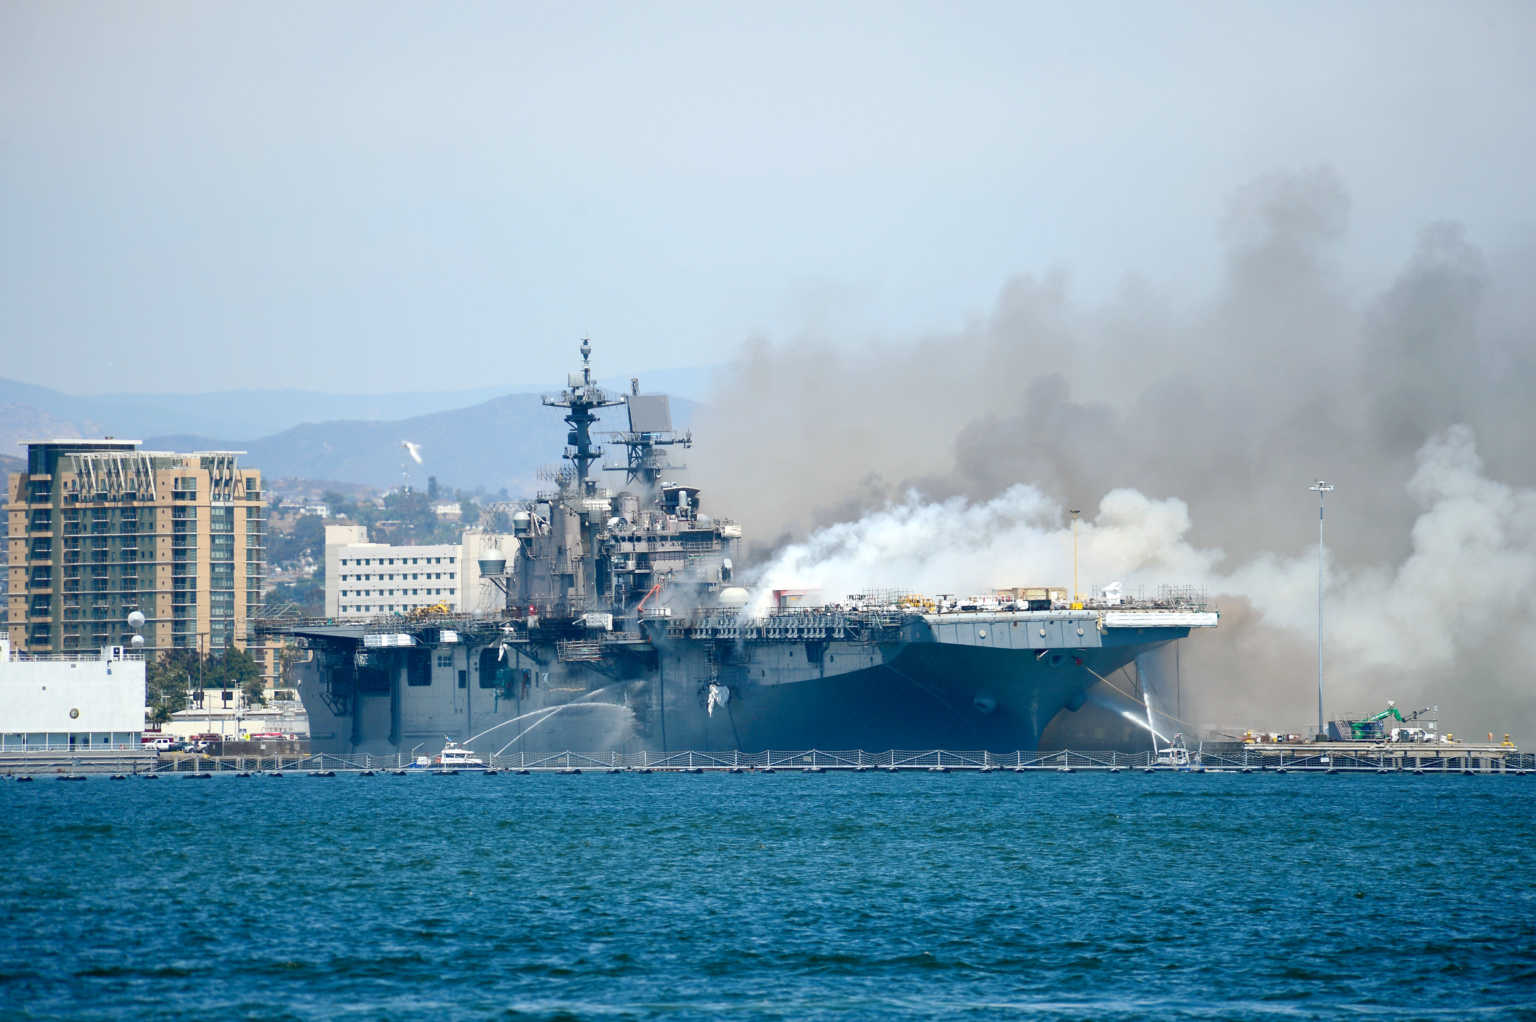 Port of San Diego Harbor Police Department boats combat a fire on board the U.S. Navy amphibious assault ship USS Bonhomme Richard at Naval Base San Diego, California, U.S. July 12, 2020. U.S. Navy/Lt. John J. Mike/Handout via REUTERS THIS IMAGE HAS BEEN SUPPLIED BY A THIRD PARTY.